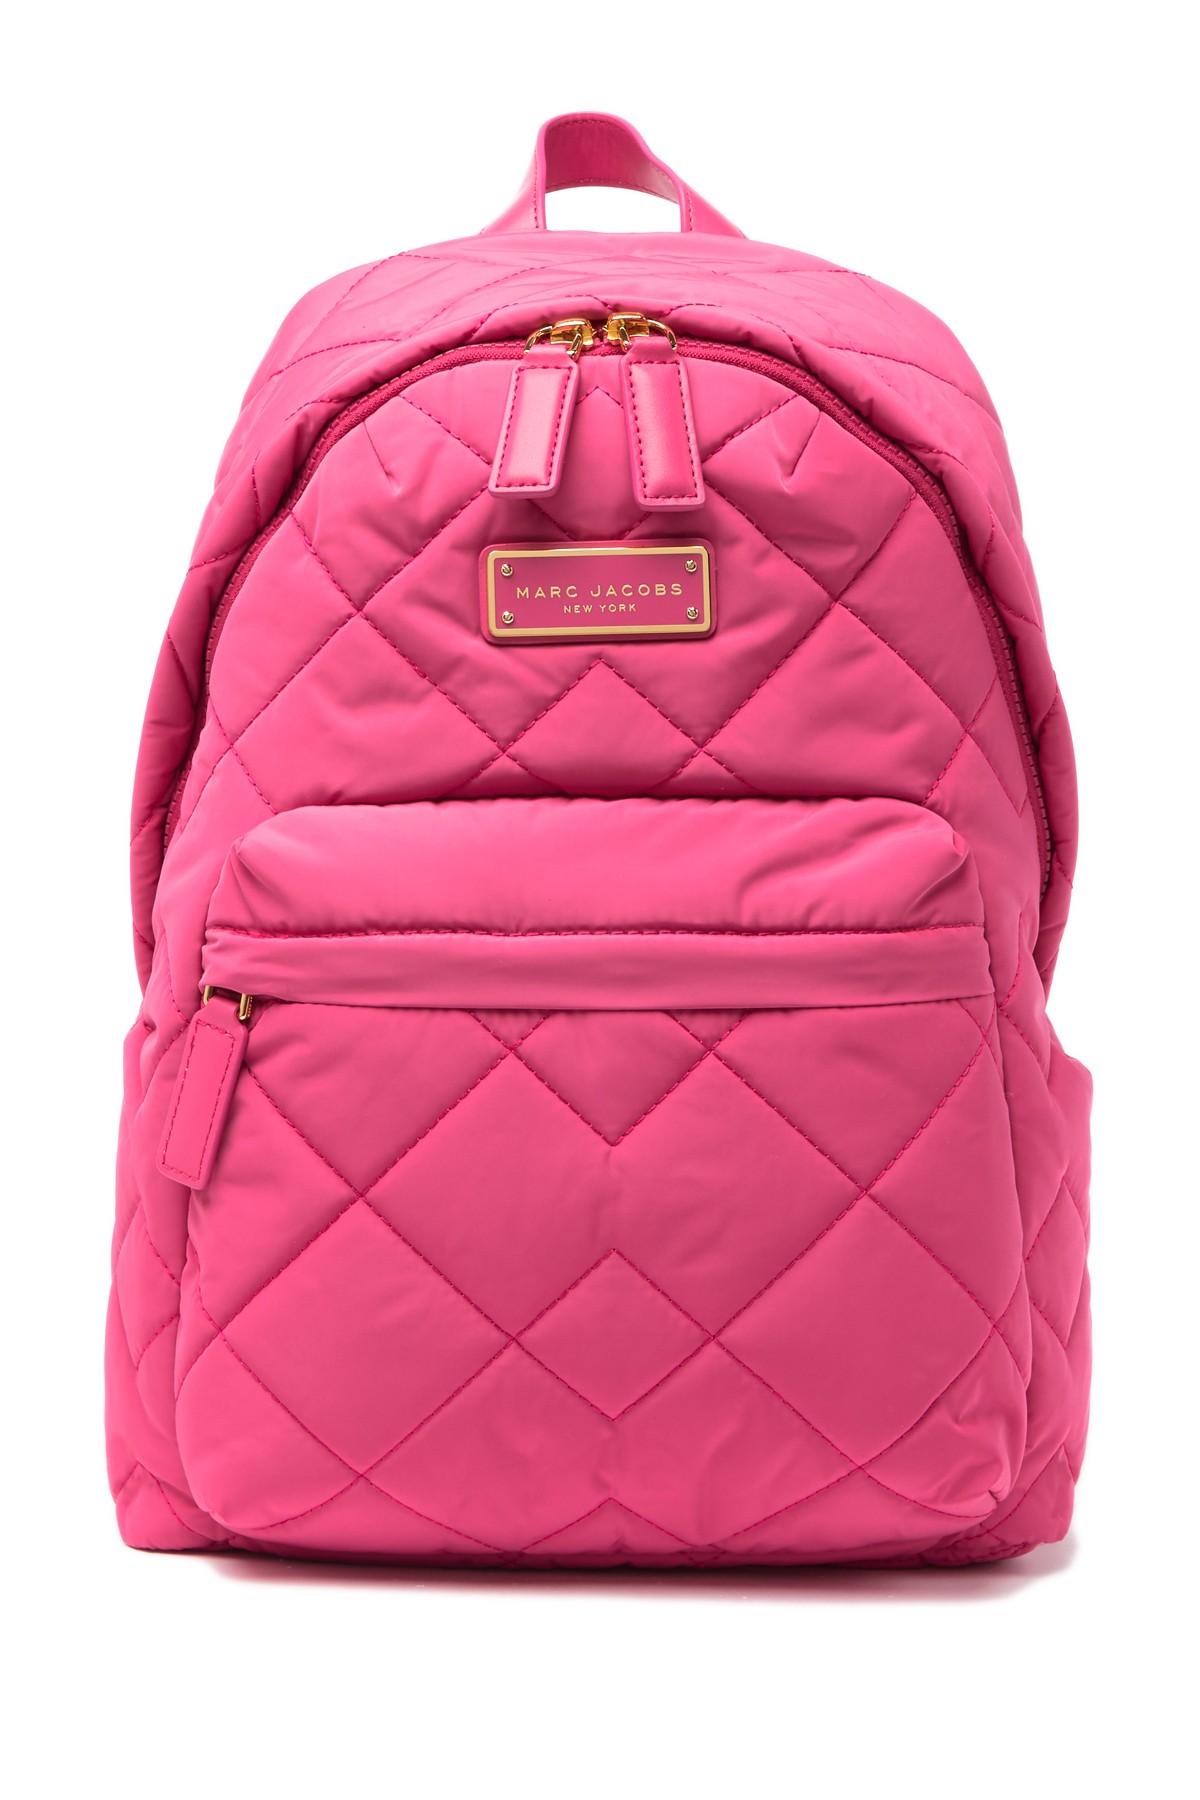 Marc Jacobs Quilted Nylon School Backpack in Pink | Lyst